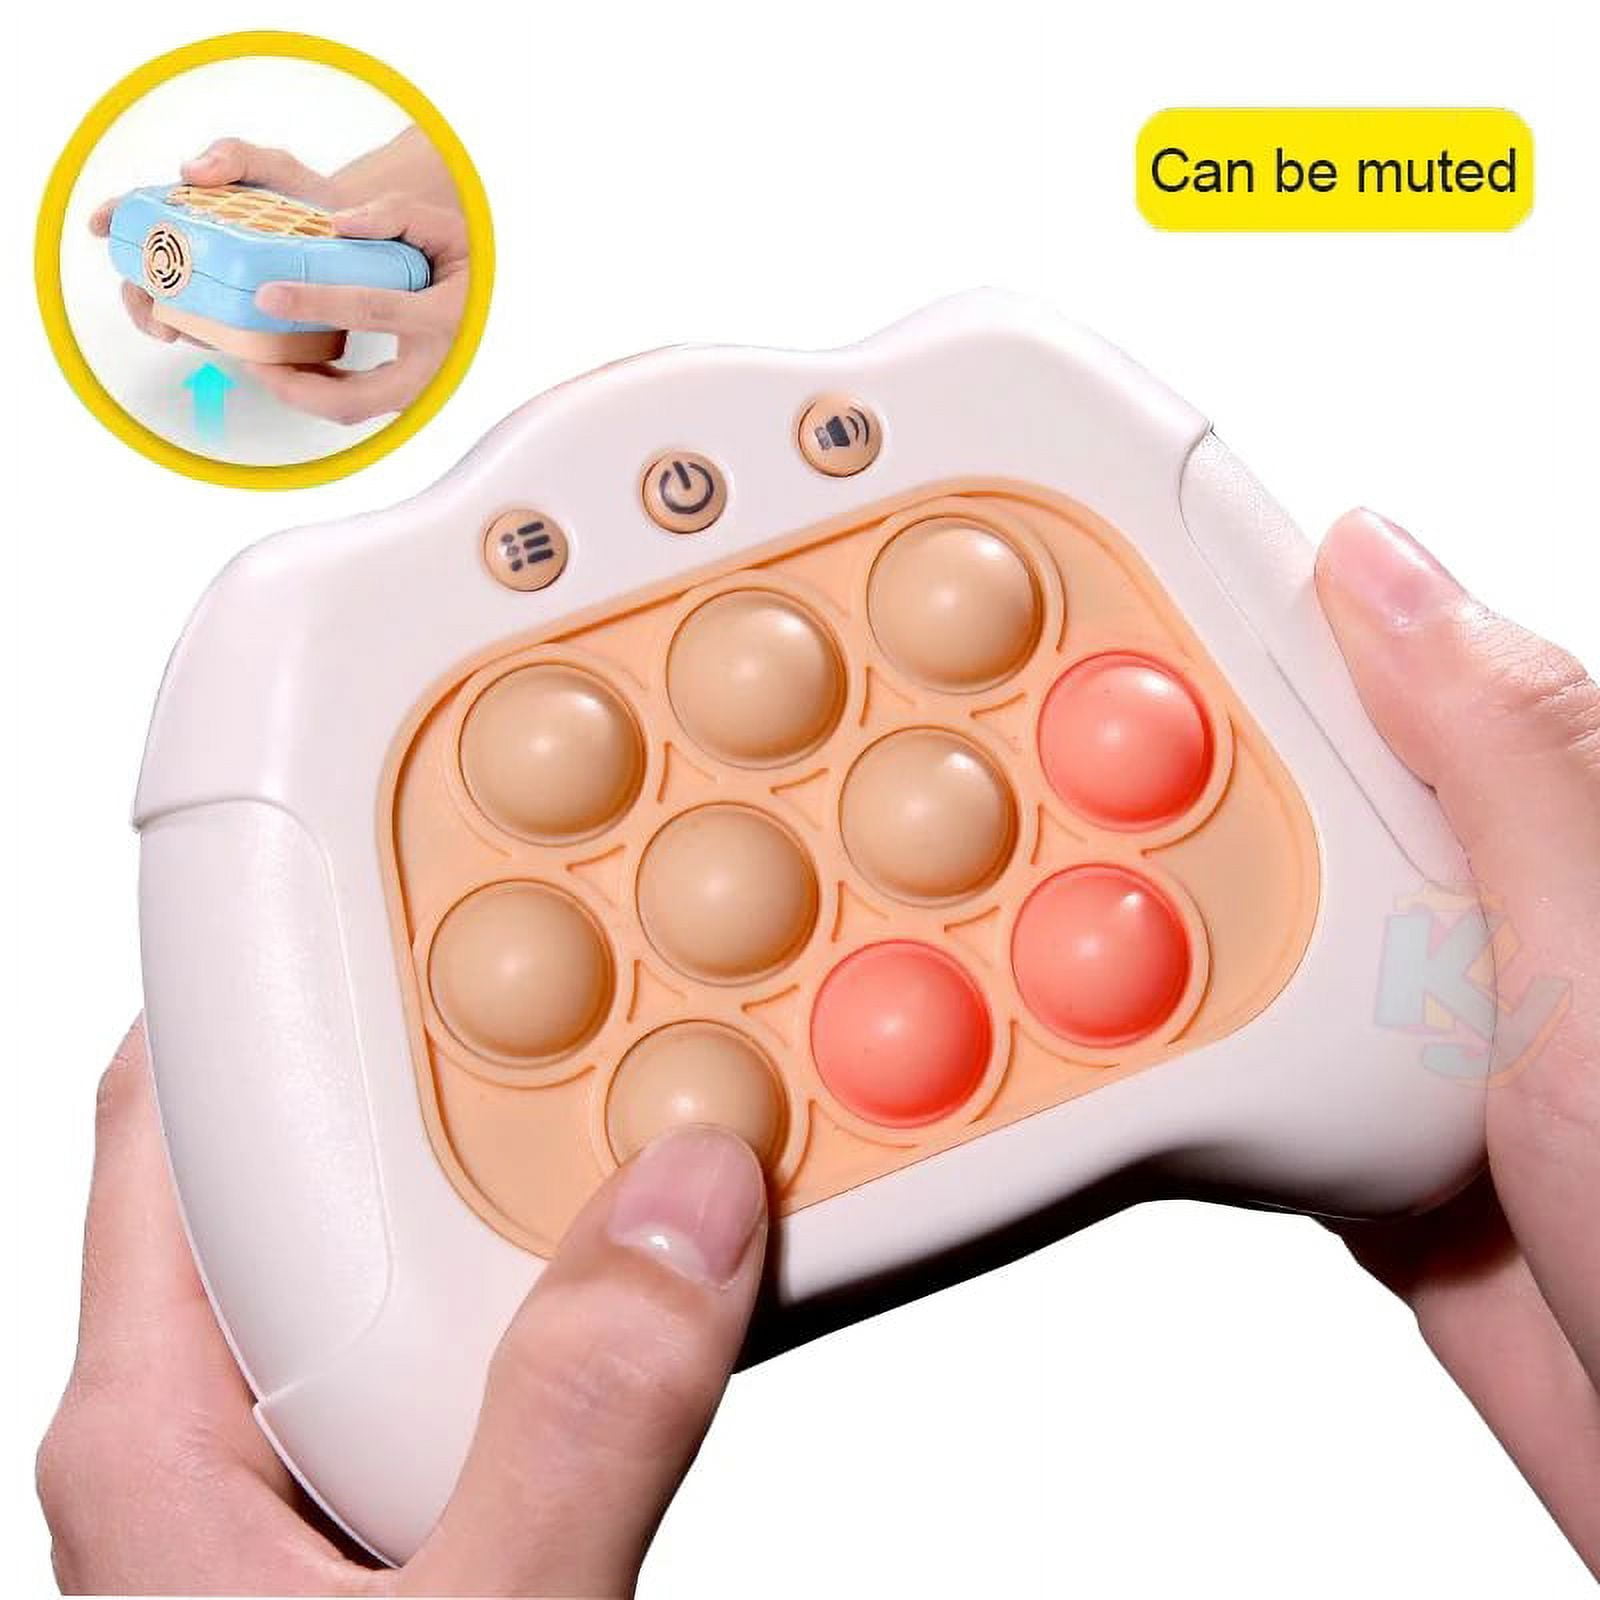 3PCS Quick Push Game Console, Press Light Up Pop Quickly, Anxiety Toys with  Bubbles to Press, Sensory Toys for Stress and Anxiety Relief for Kids and  Adults, Quick Response Gaming Toy 